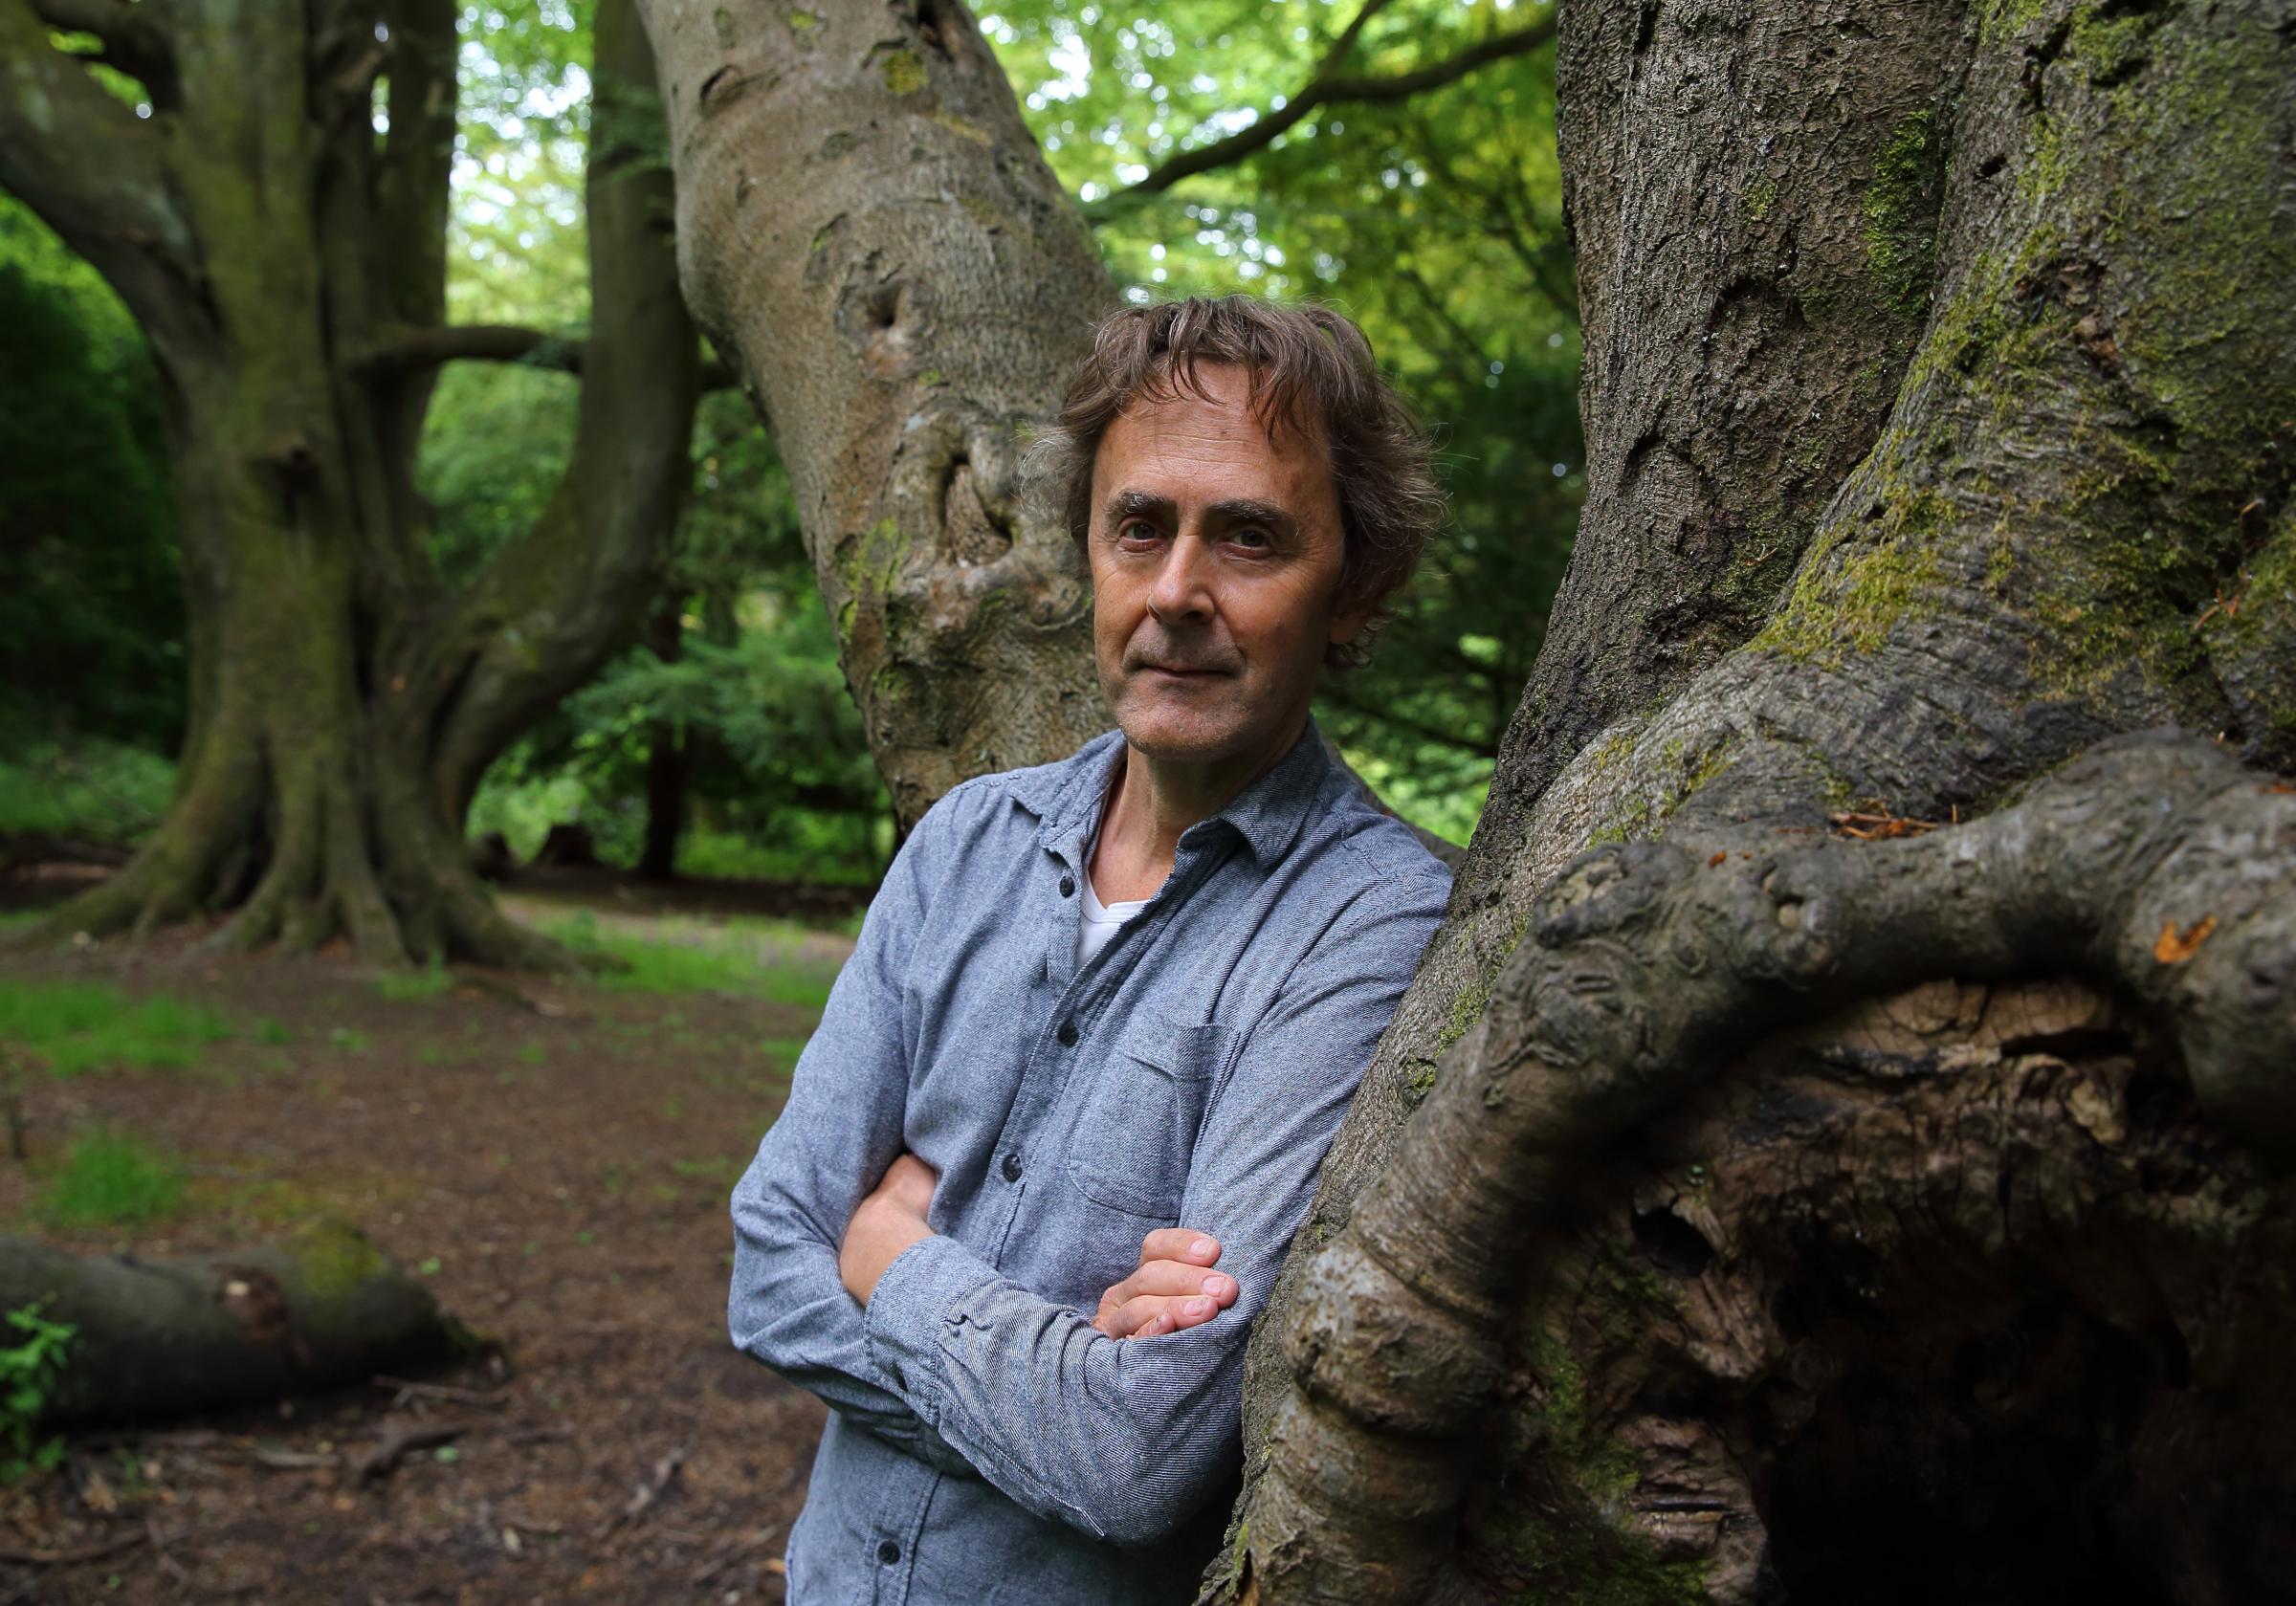 Herald Covid memorial artist Alec Finlay pictured in Pollok Country Park. Photograph by Colin Mearns.